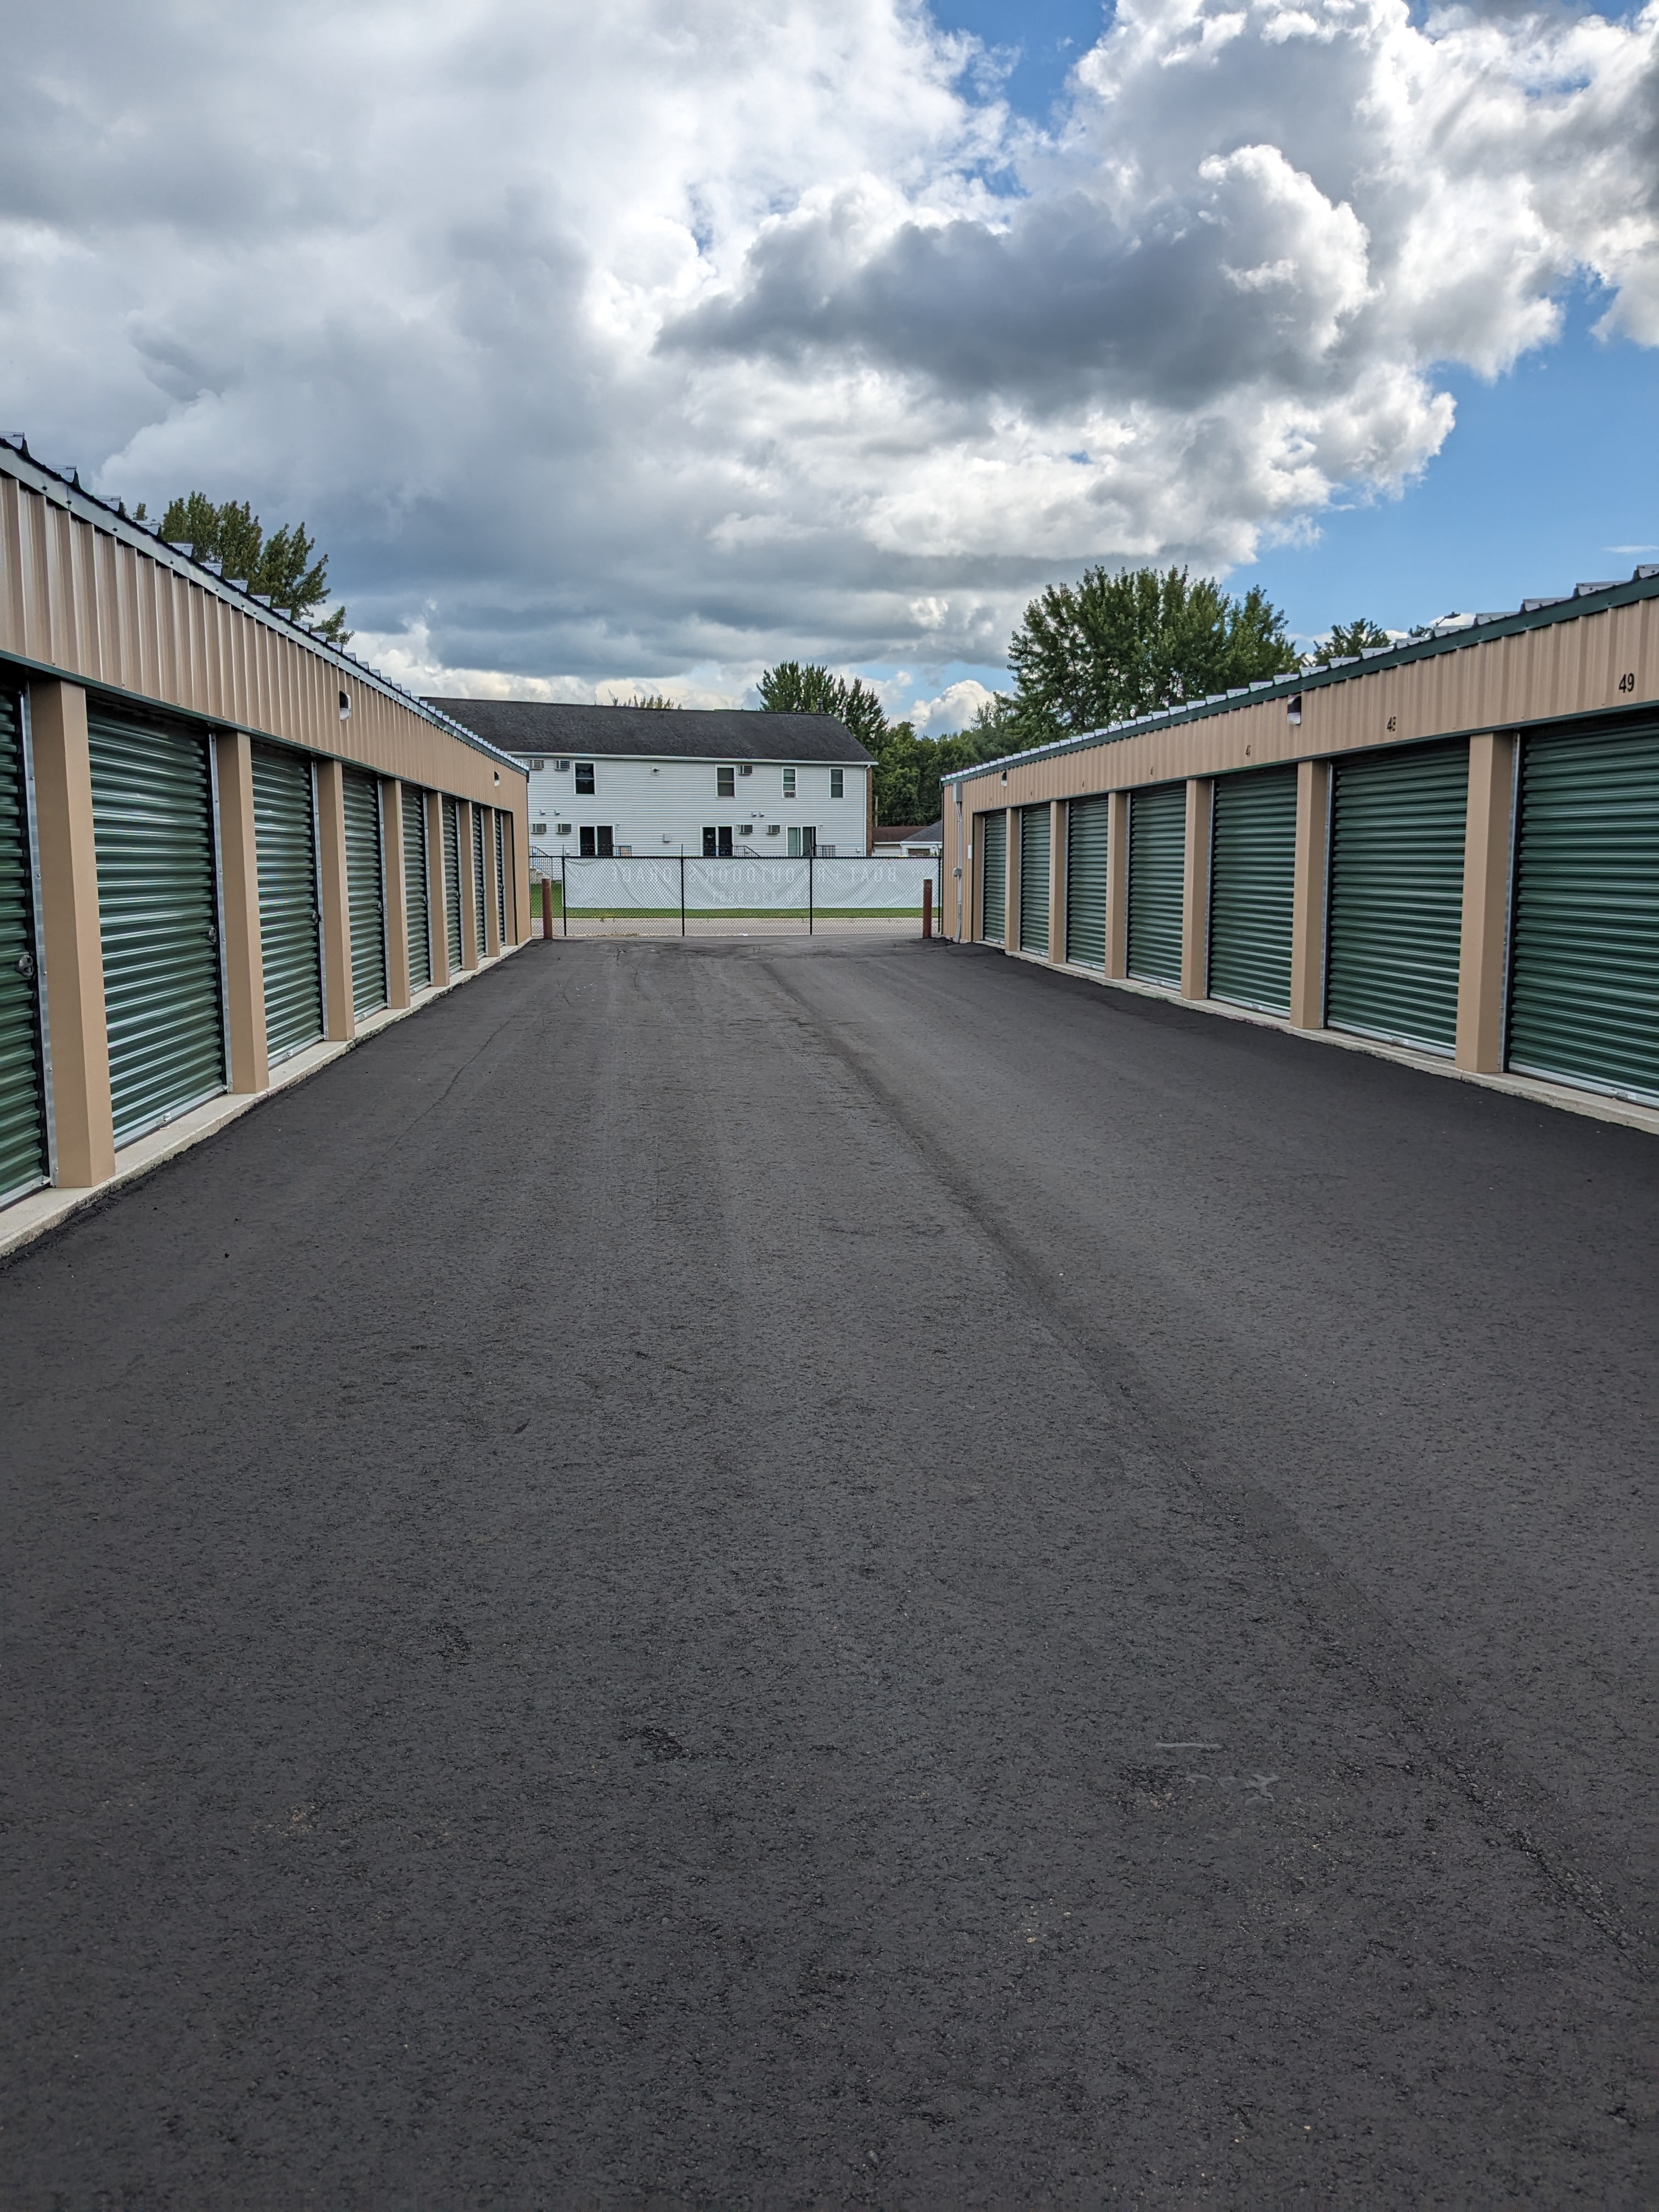 Wide drive aisles with easy access to your unit